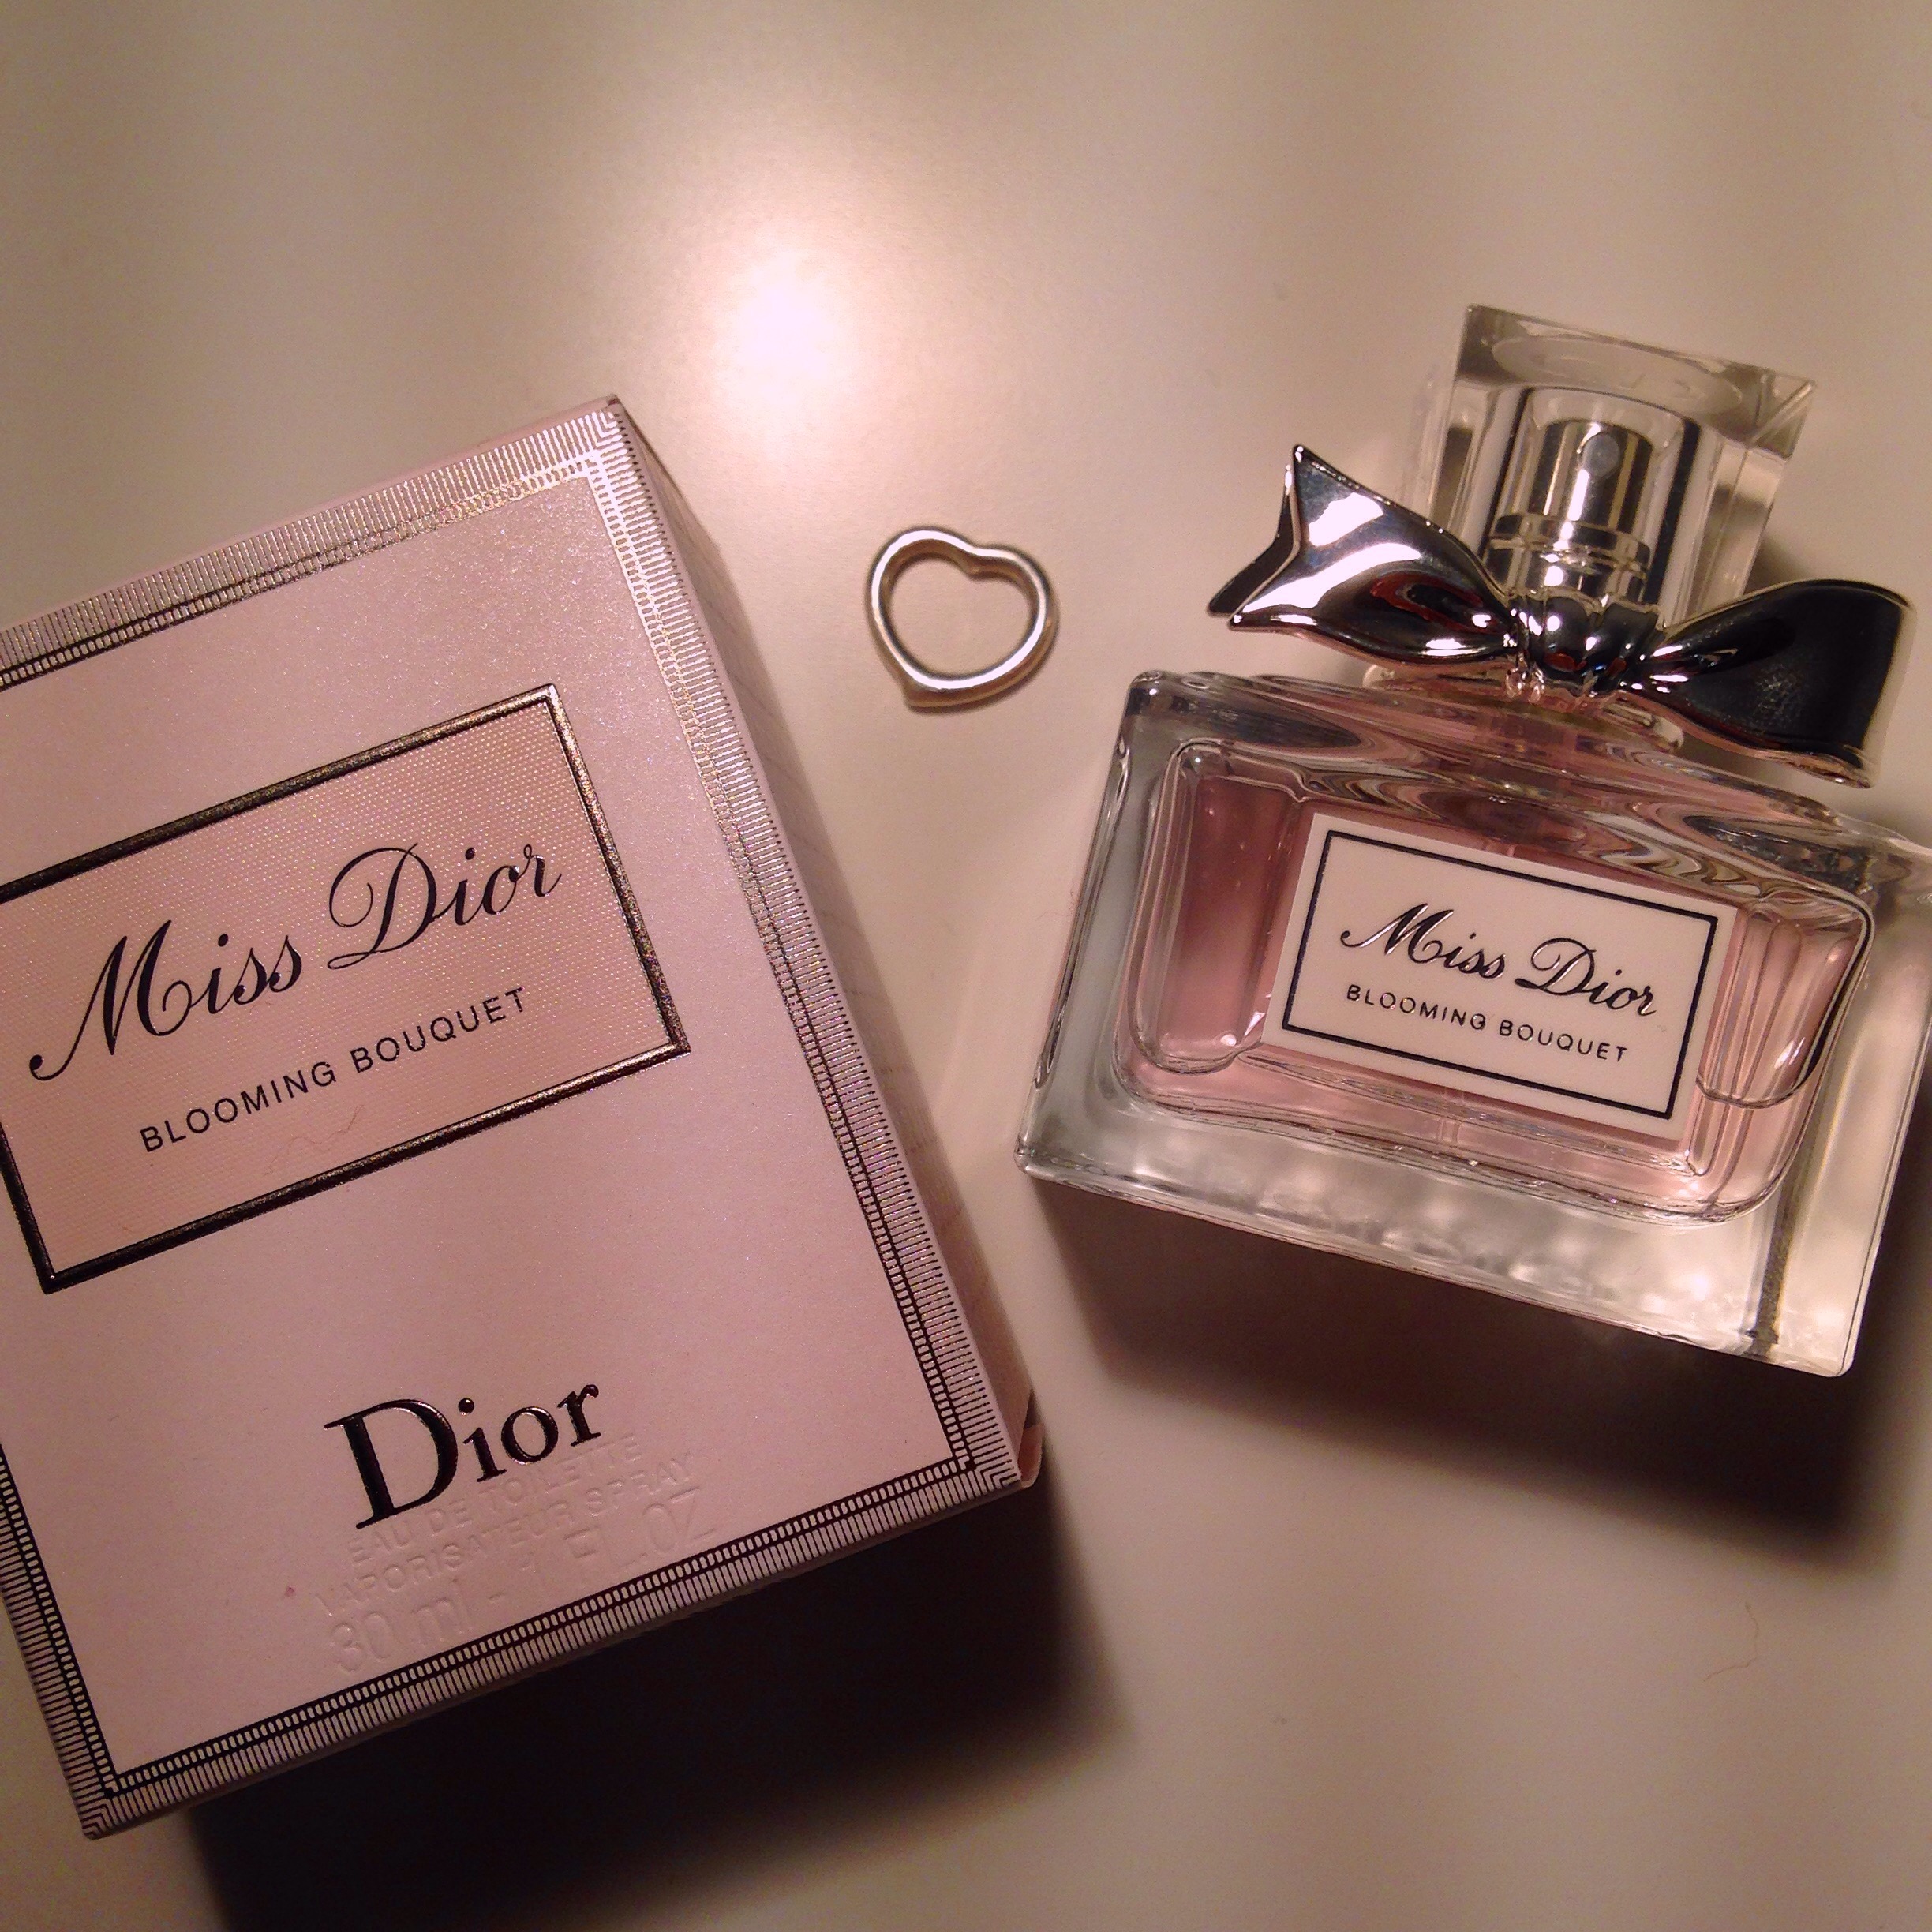 miss dior absolutely bouquet